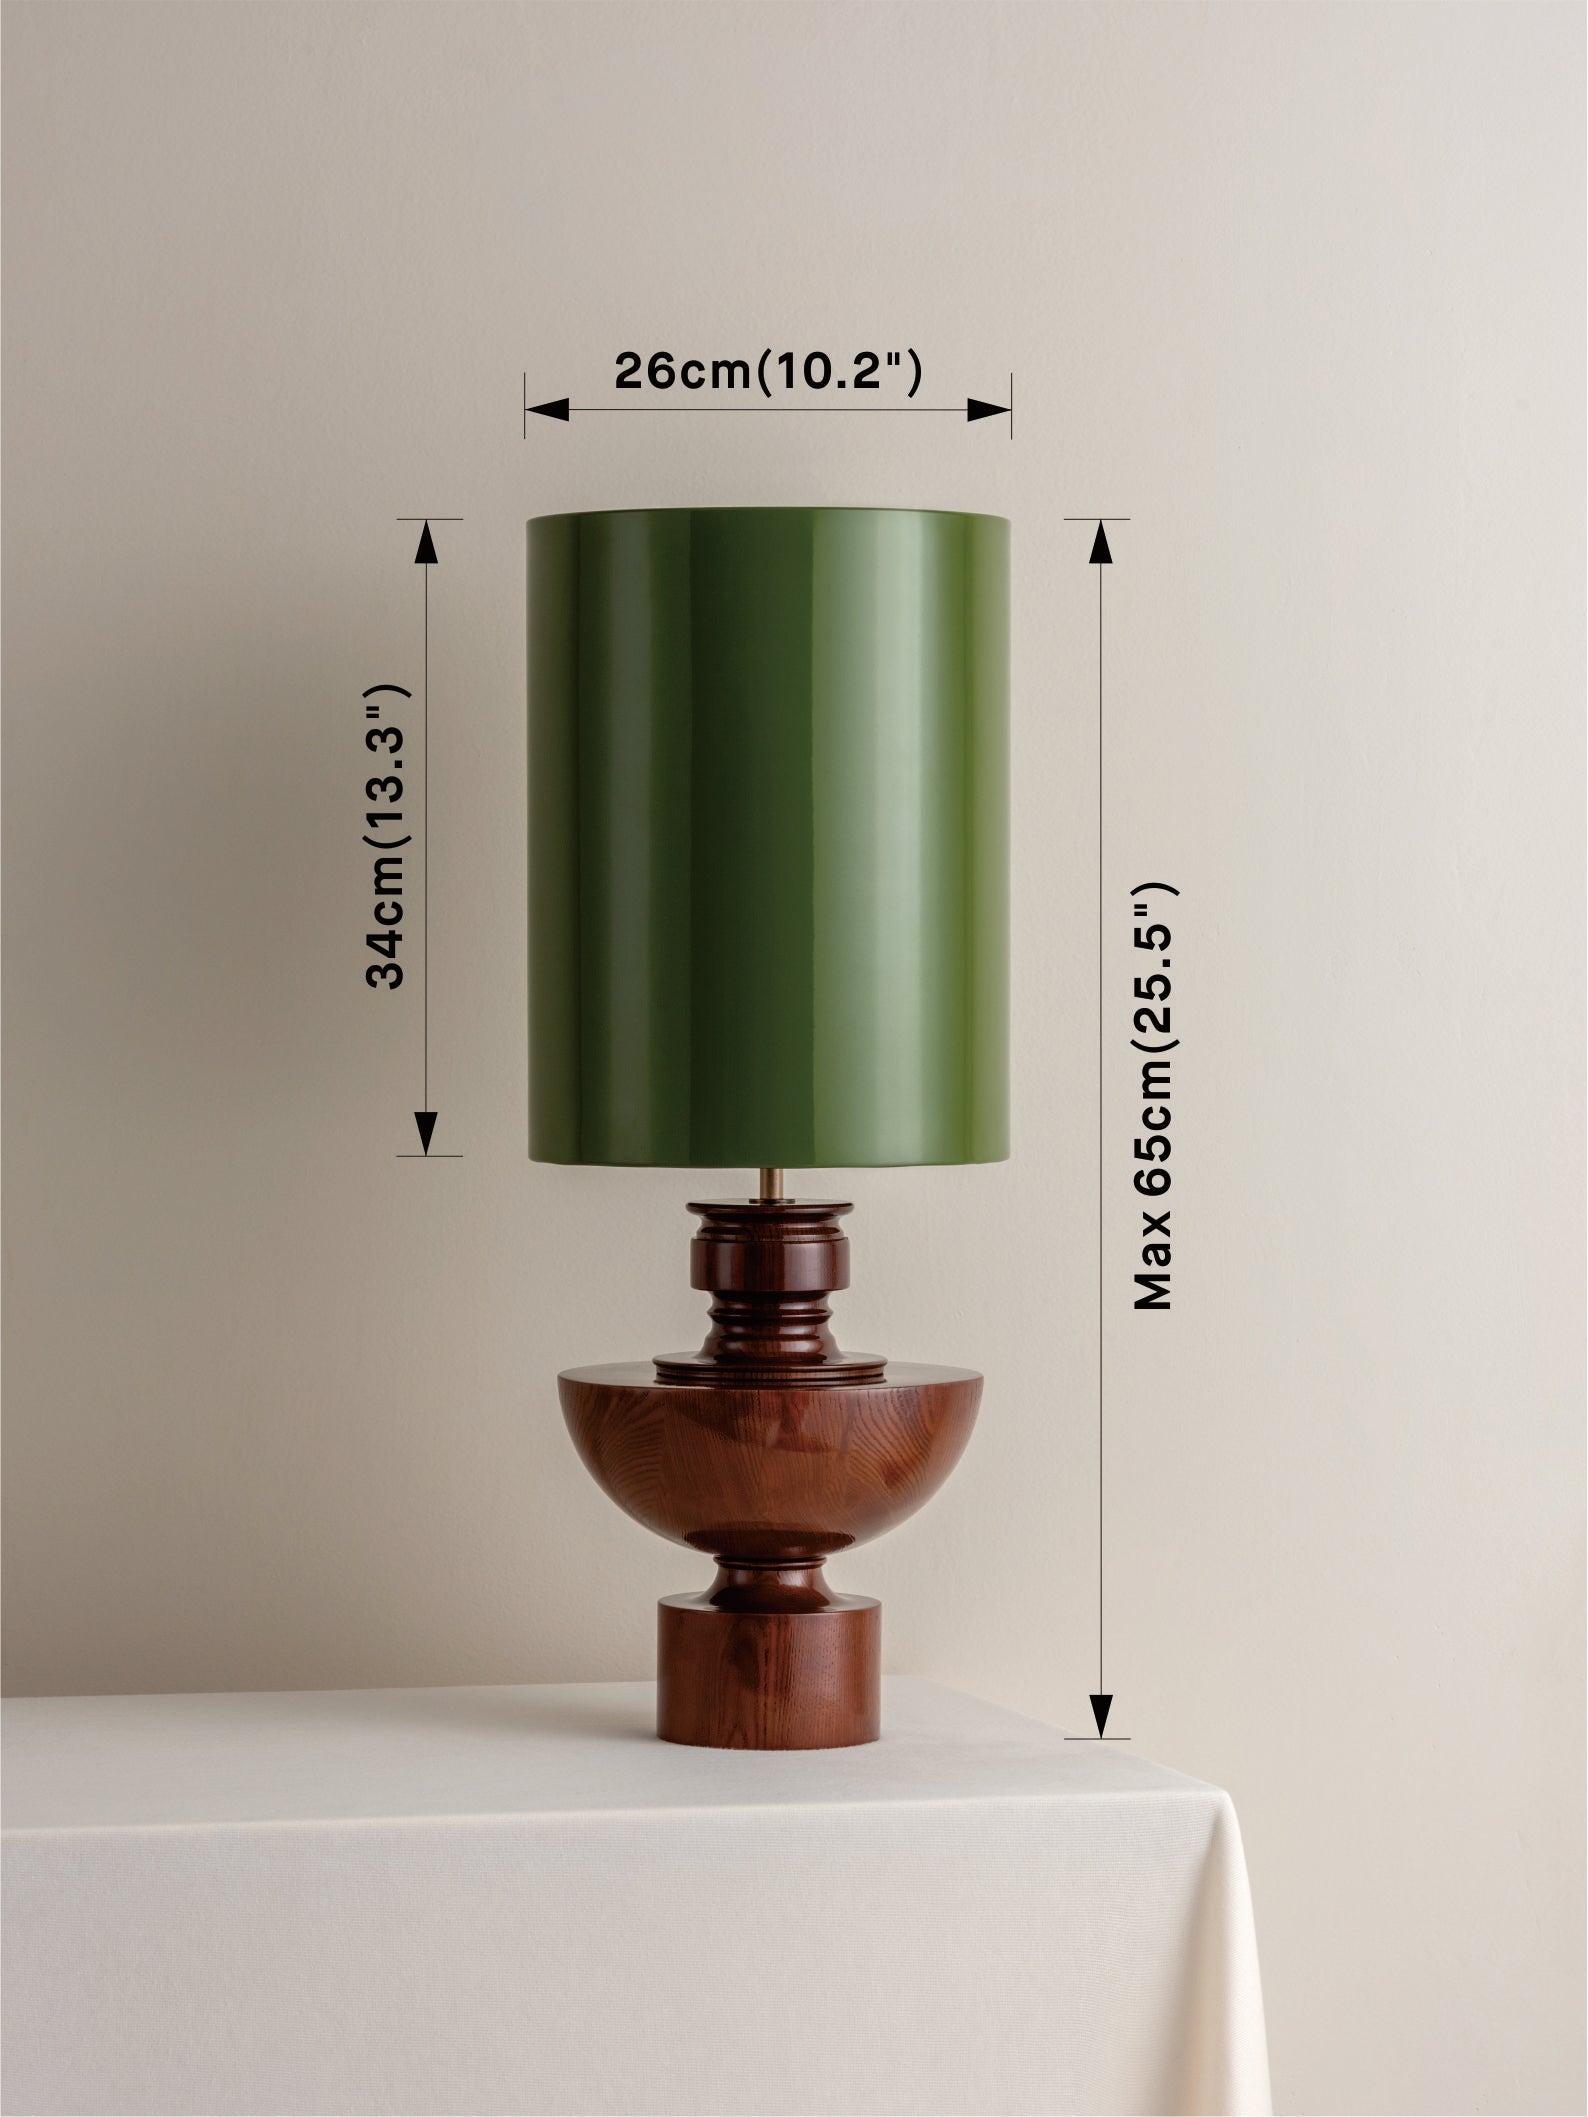 Editions spun wood lamp with + green lacquer shade | Table Lamp | Lights & Lamps Inc | Modern Affordable Designer Lighting | USA